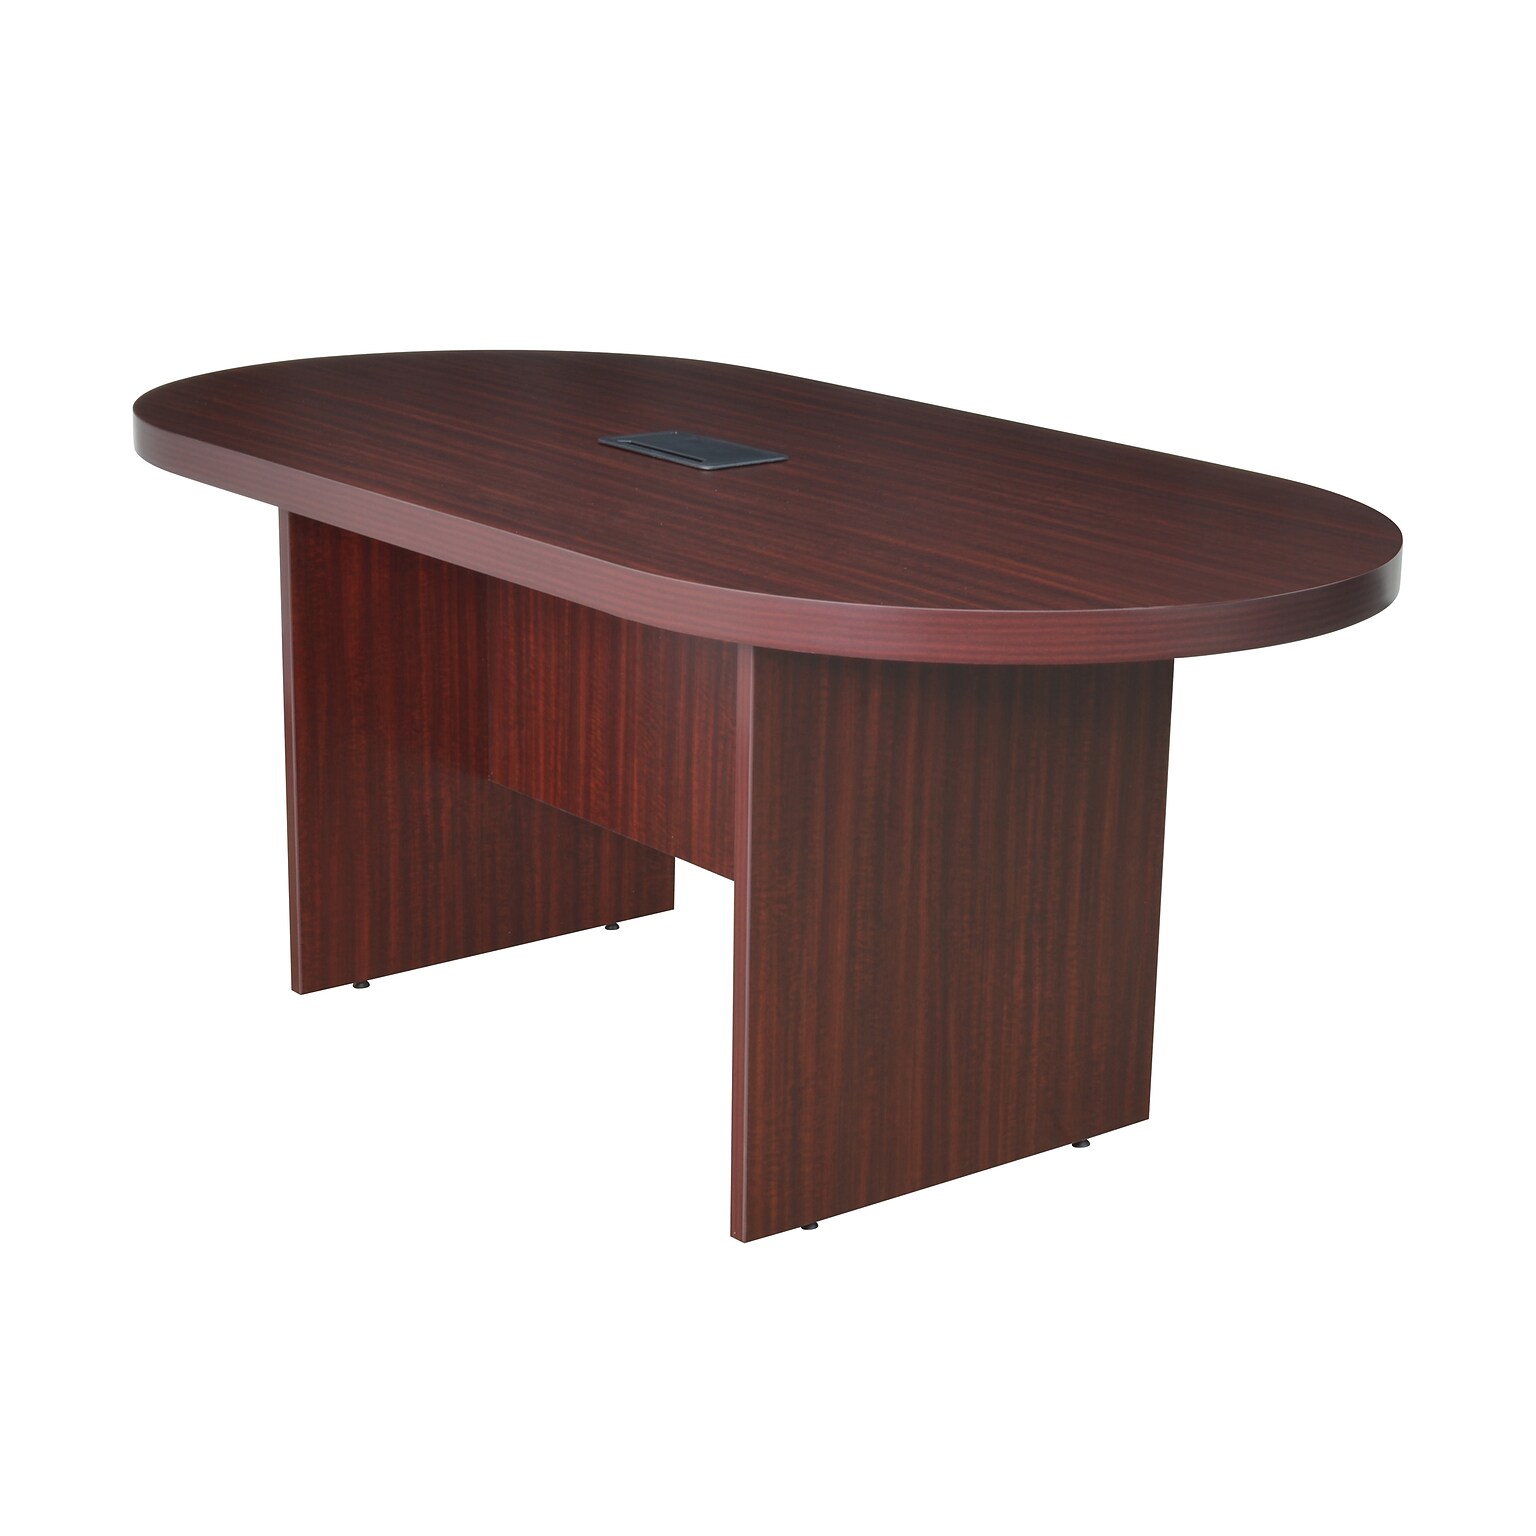 Regency Legacy 71 Racetrack Conference Table, Mahogany (LCTRT7135MH)